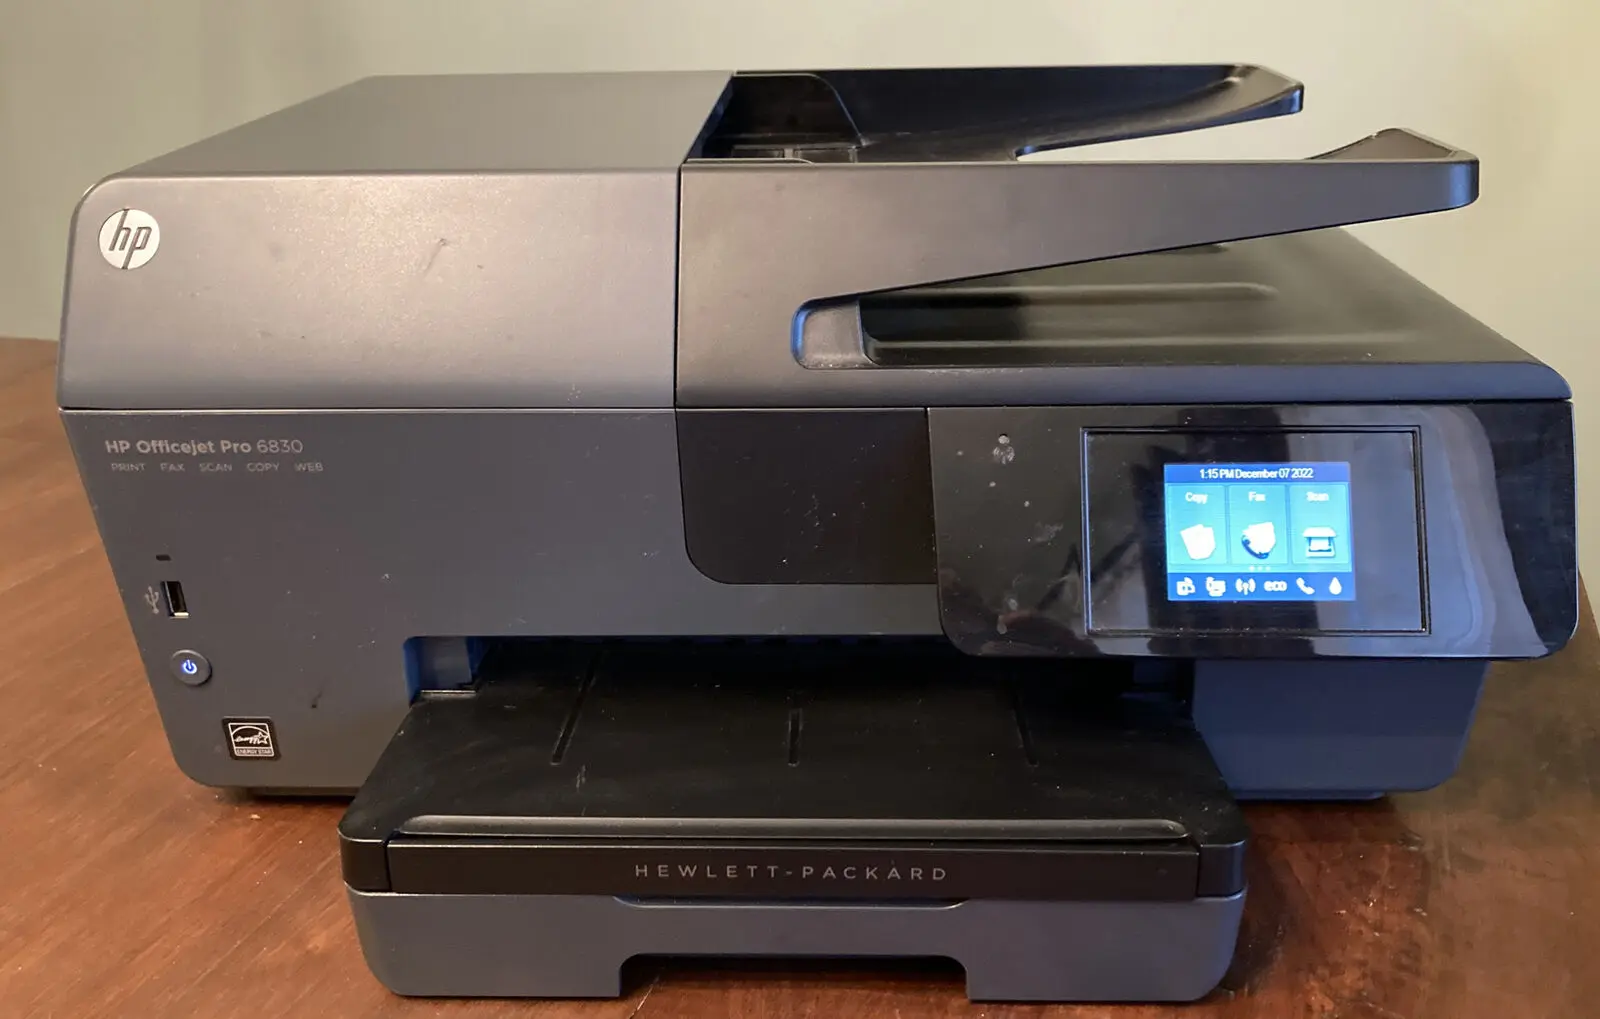 hewlett packard office jet 6830 - What is the price of HP 6830 printer